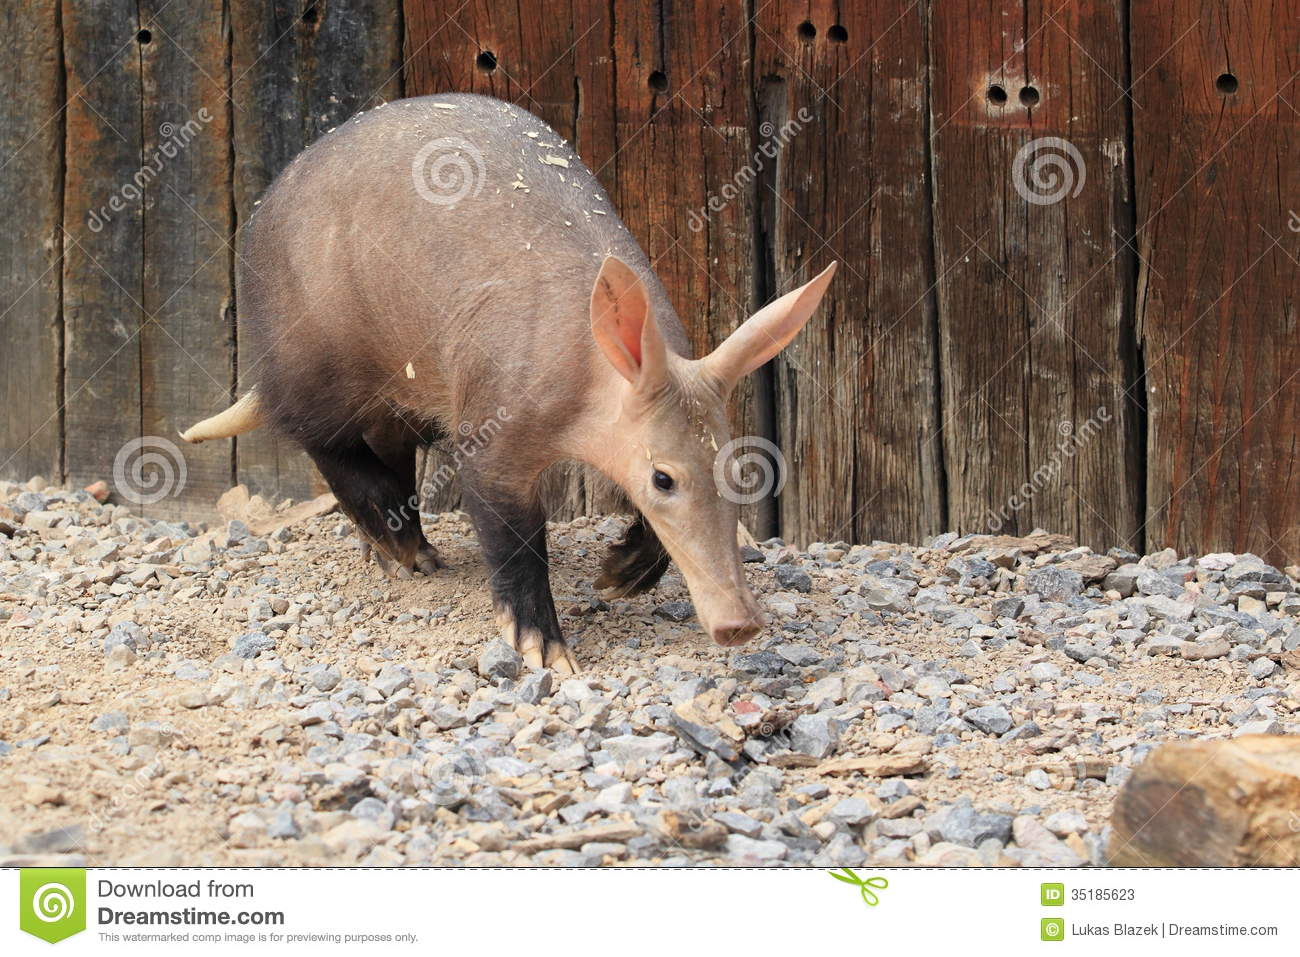 The Young Aardvark In The Rocky Soil 